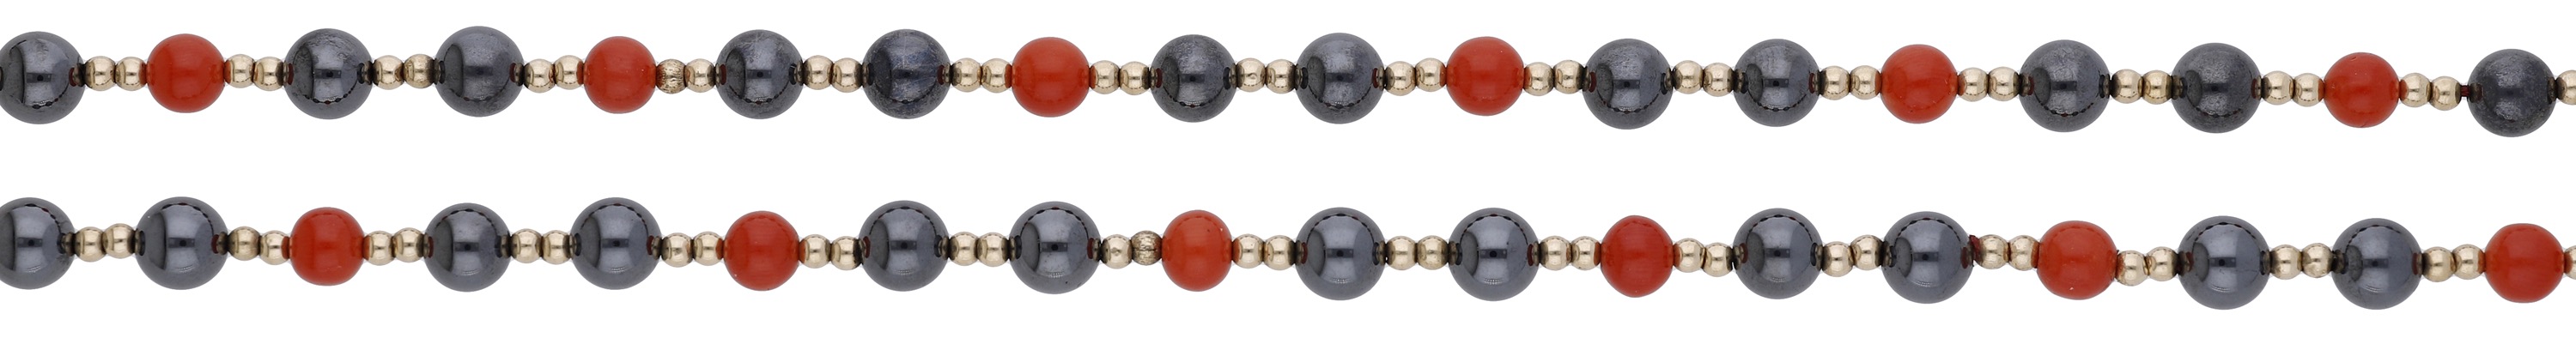 A hematite and coral bead necklace, strung as a single-row of coral corallium rubrum and hem...